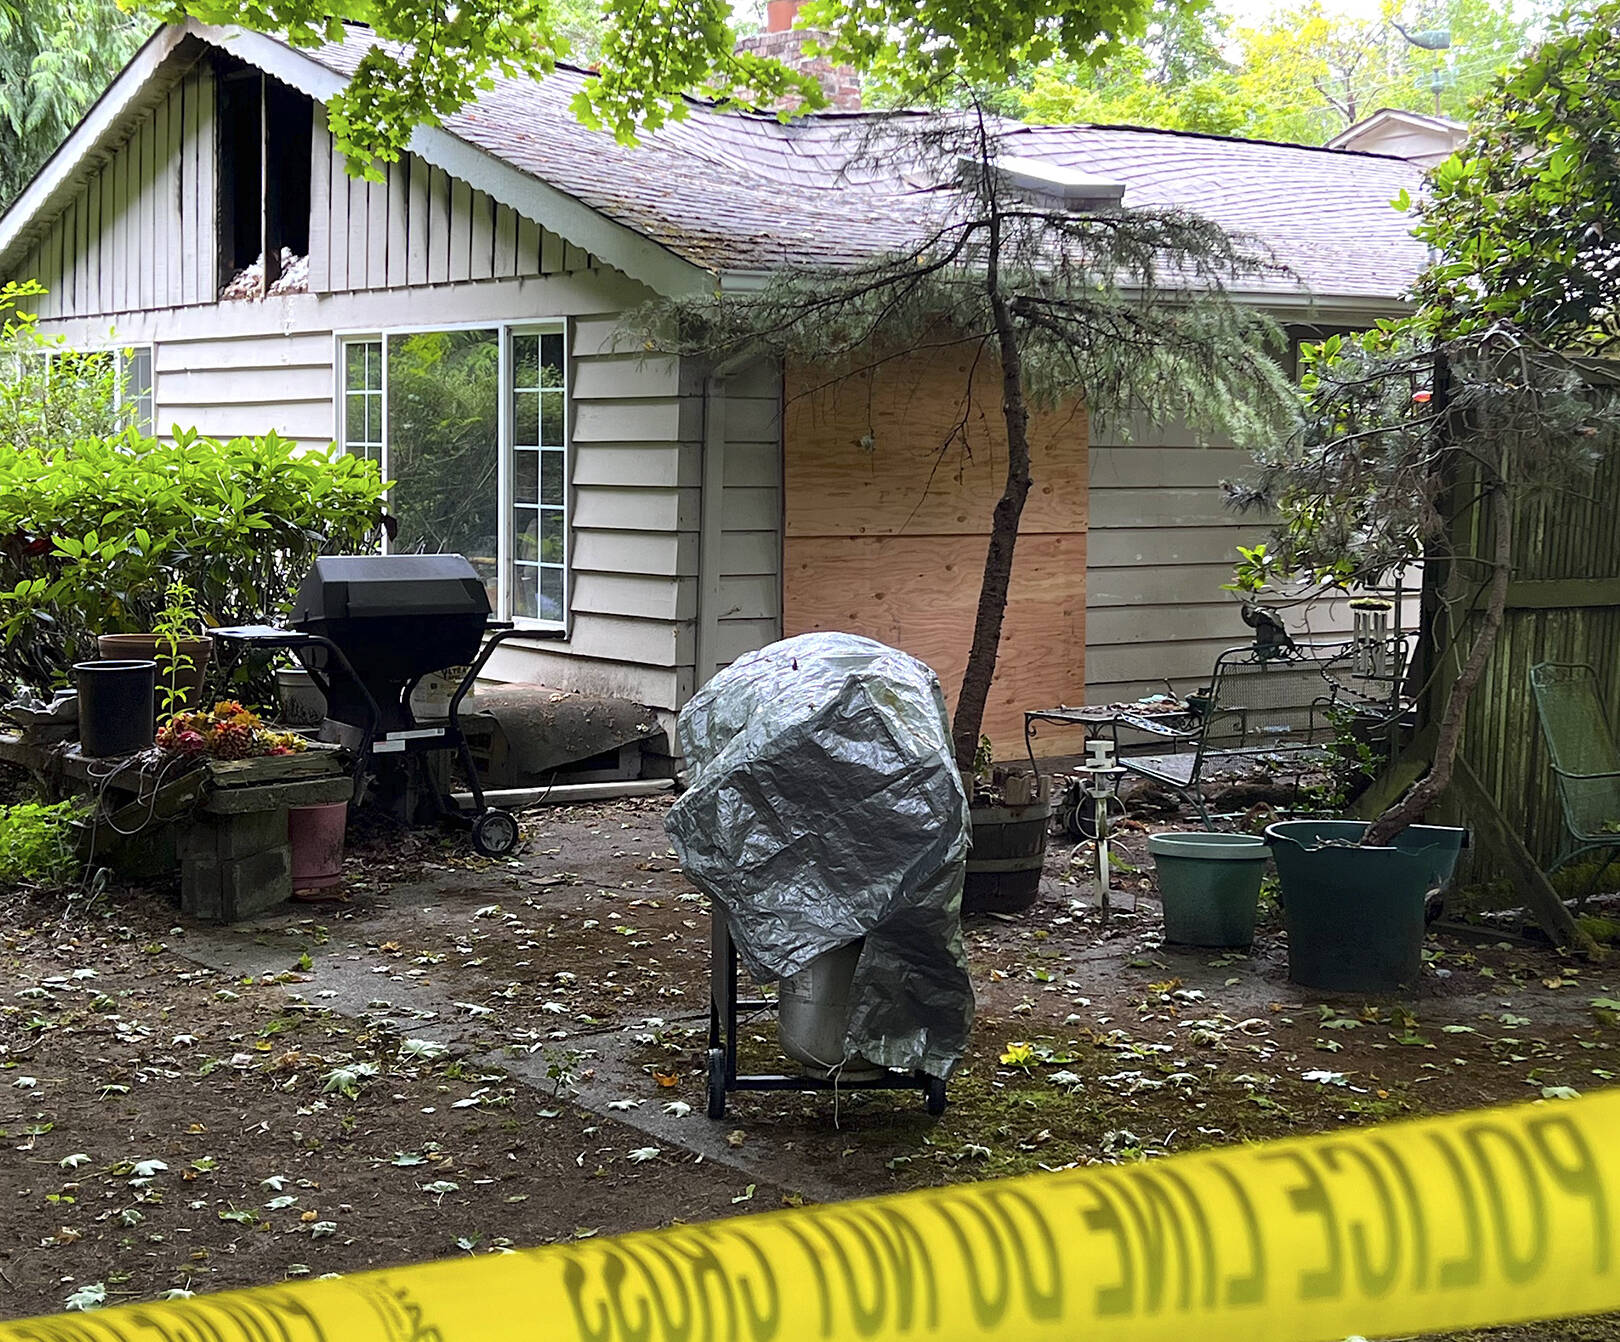 Caution tape surrounds a home on Sunrise Drive that caught fire June 29 and claimed the life of Charles J. Adolfson. Nancy Treder/Kitsap News Group